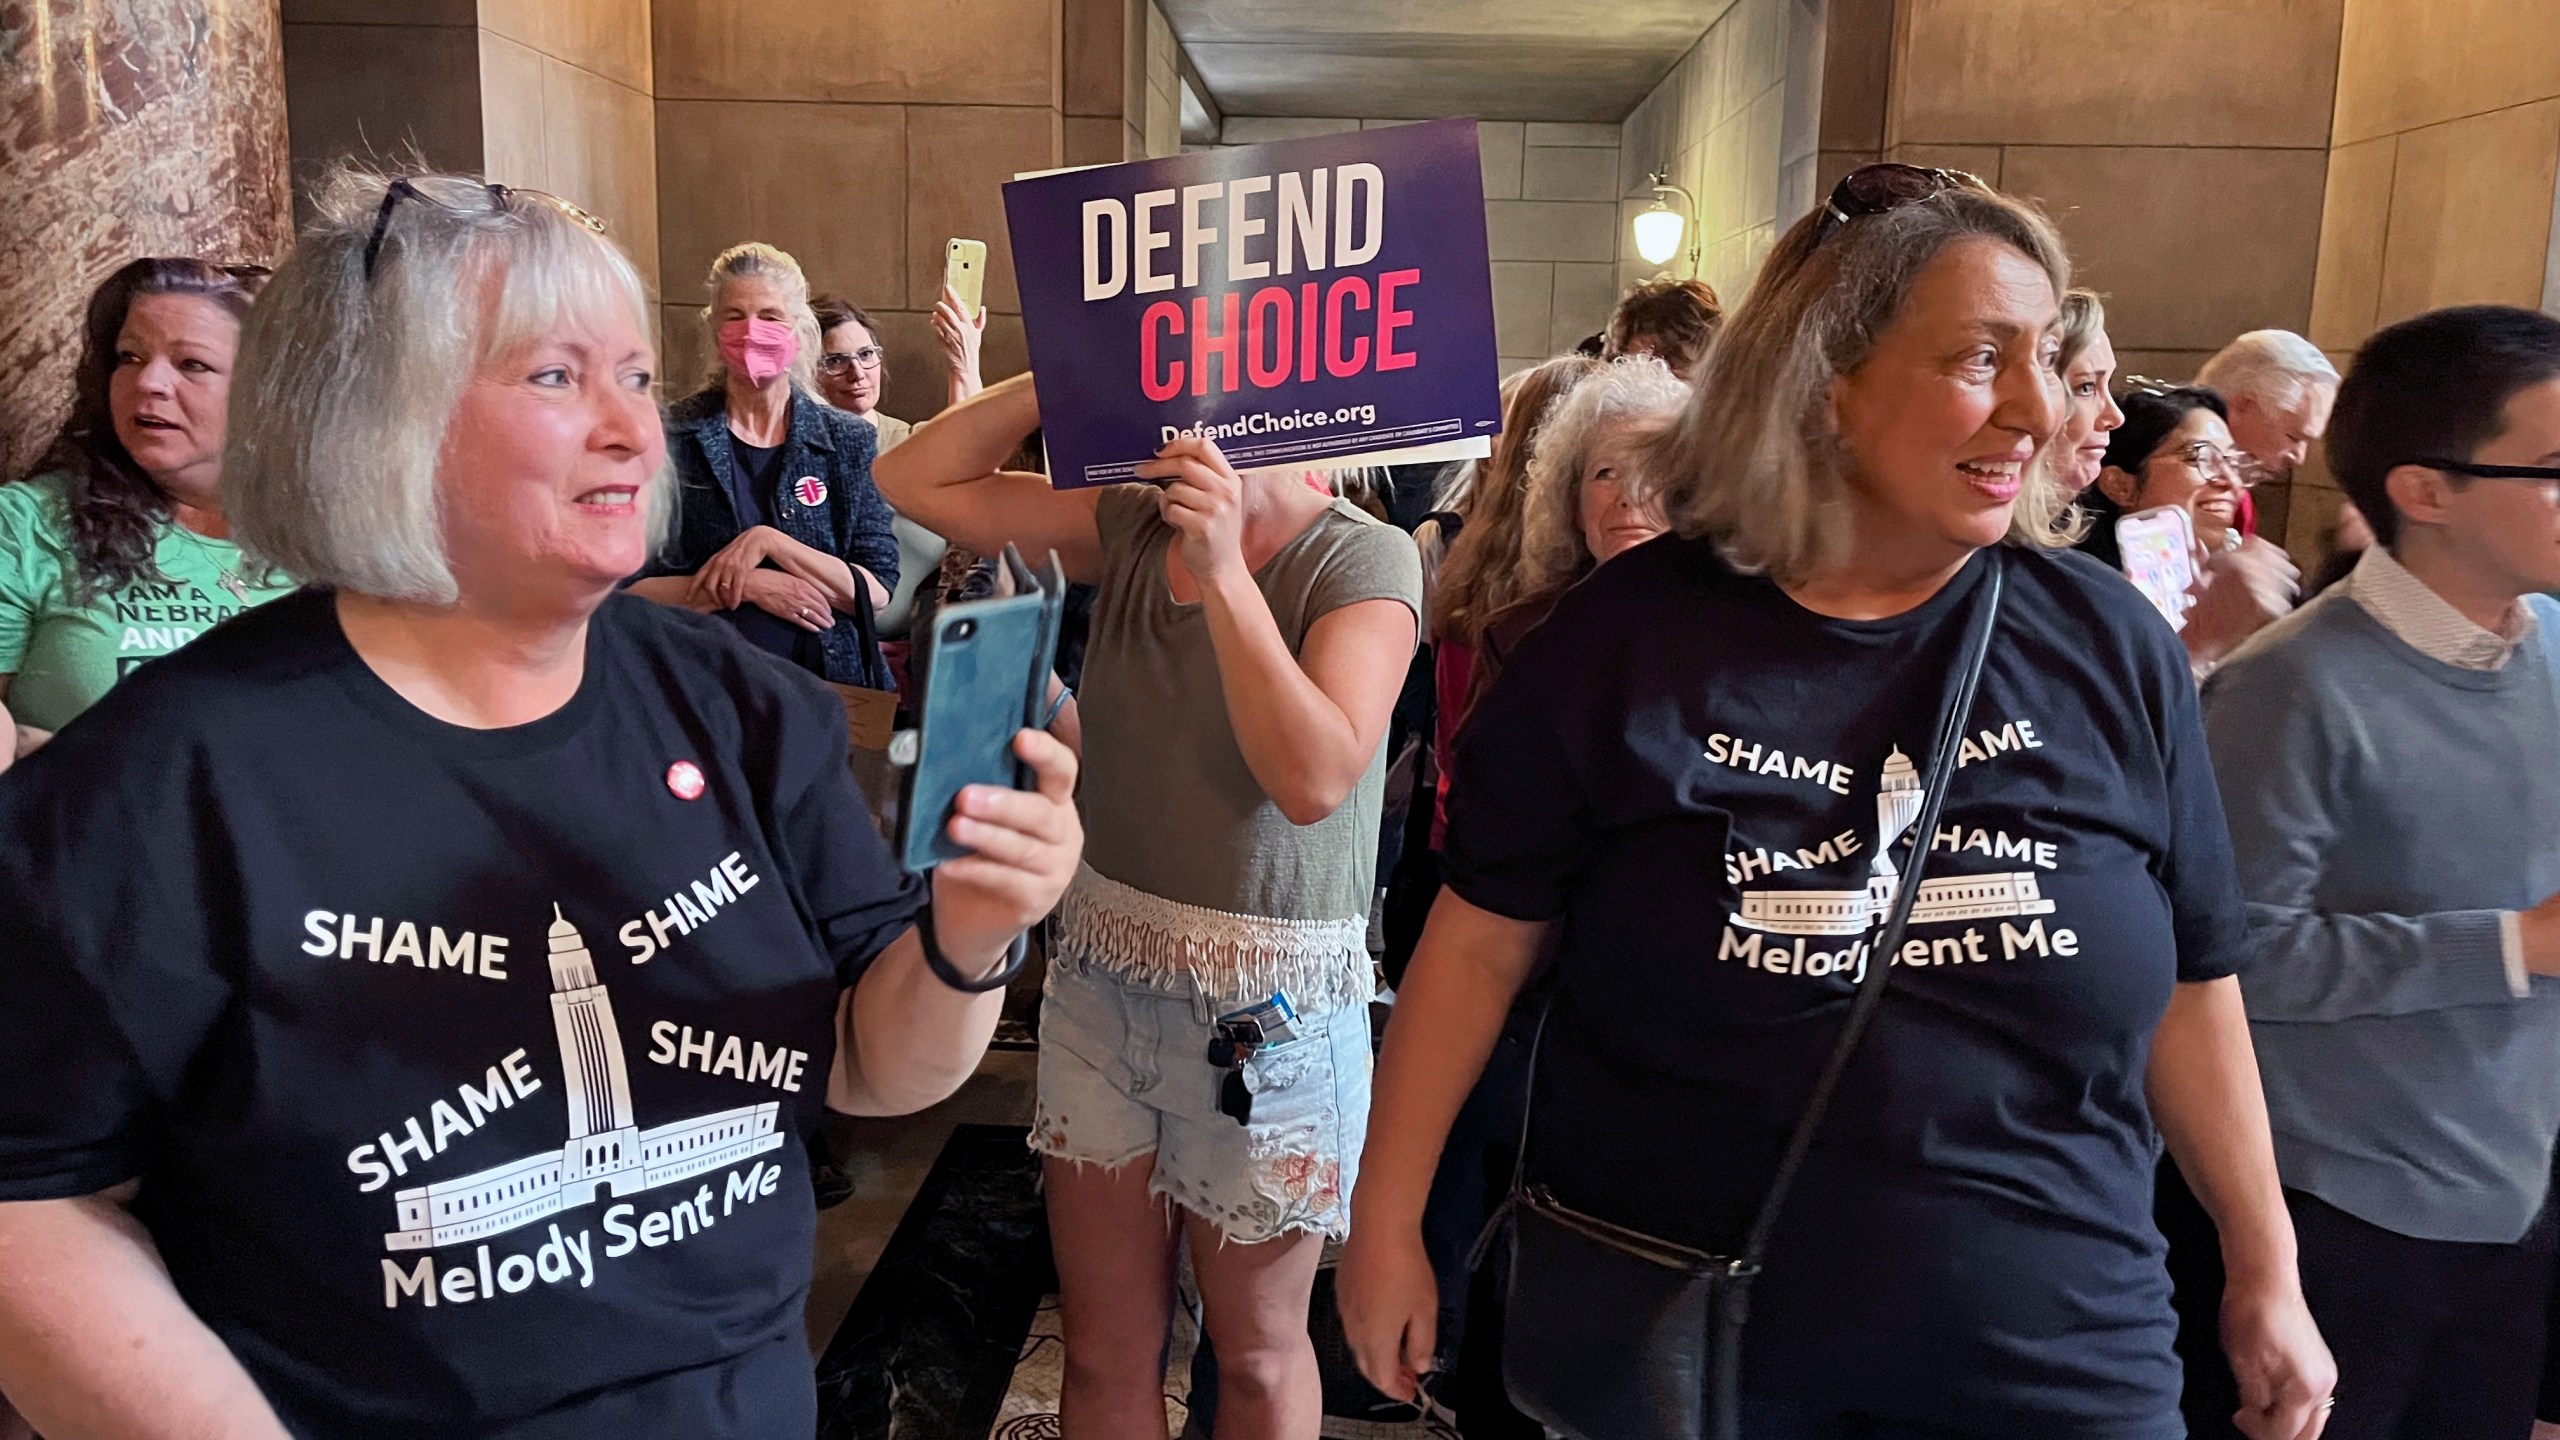 Pat Neal, left, and Ann Fintell, both of Lincoln, celebrate in the Nebraska Capitol rotunda after the failure of a bill that would have banned abortion around the sixth week of pregnancy, Thursday, April 27, 2023 in Lincoln, Neb. The bill is now likely dead for the year, leaving in place a 2010 law that bans abortions at 20 weeks. (AP Photo/Margery Beck)